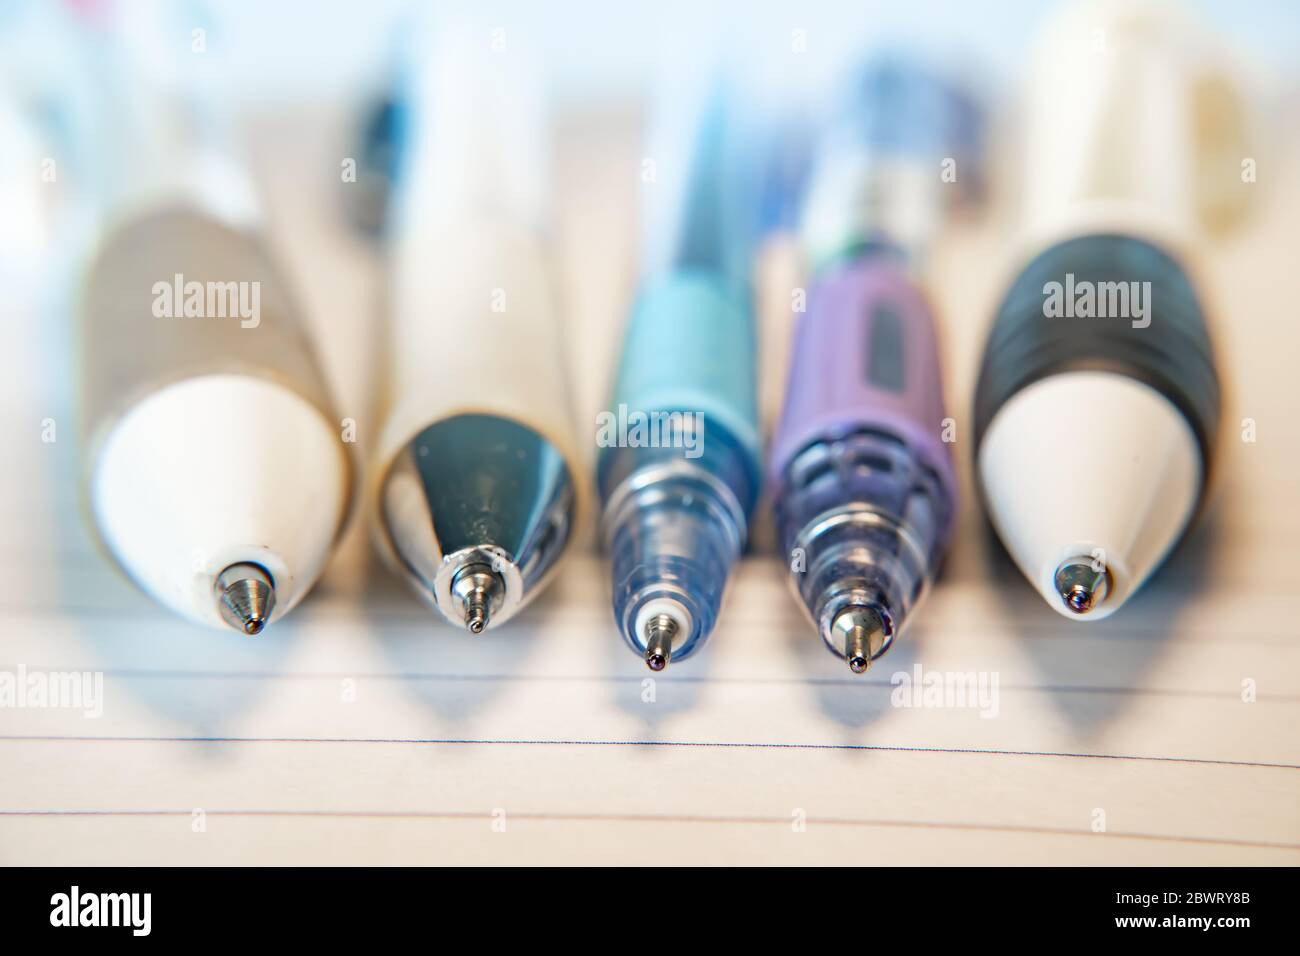 A group of ballpoint pens Stock Photo